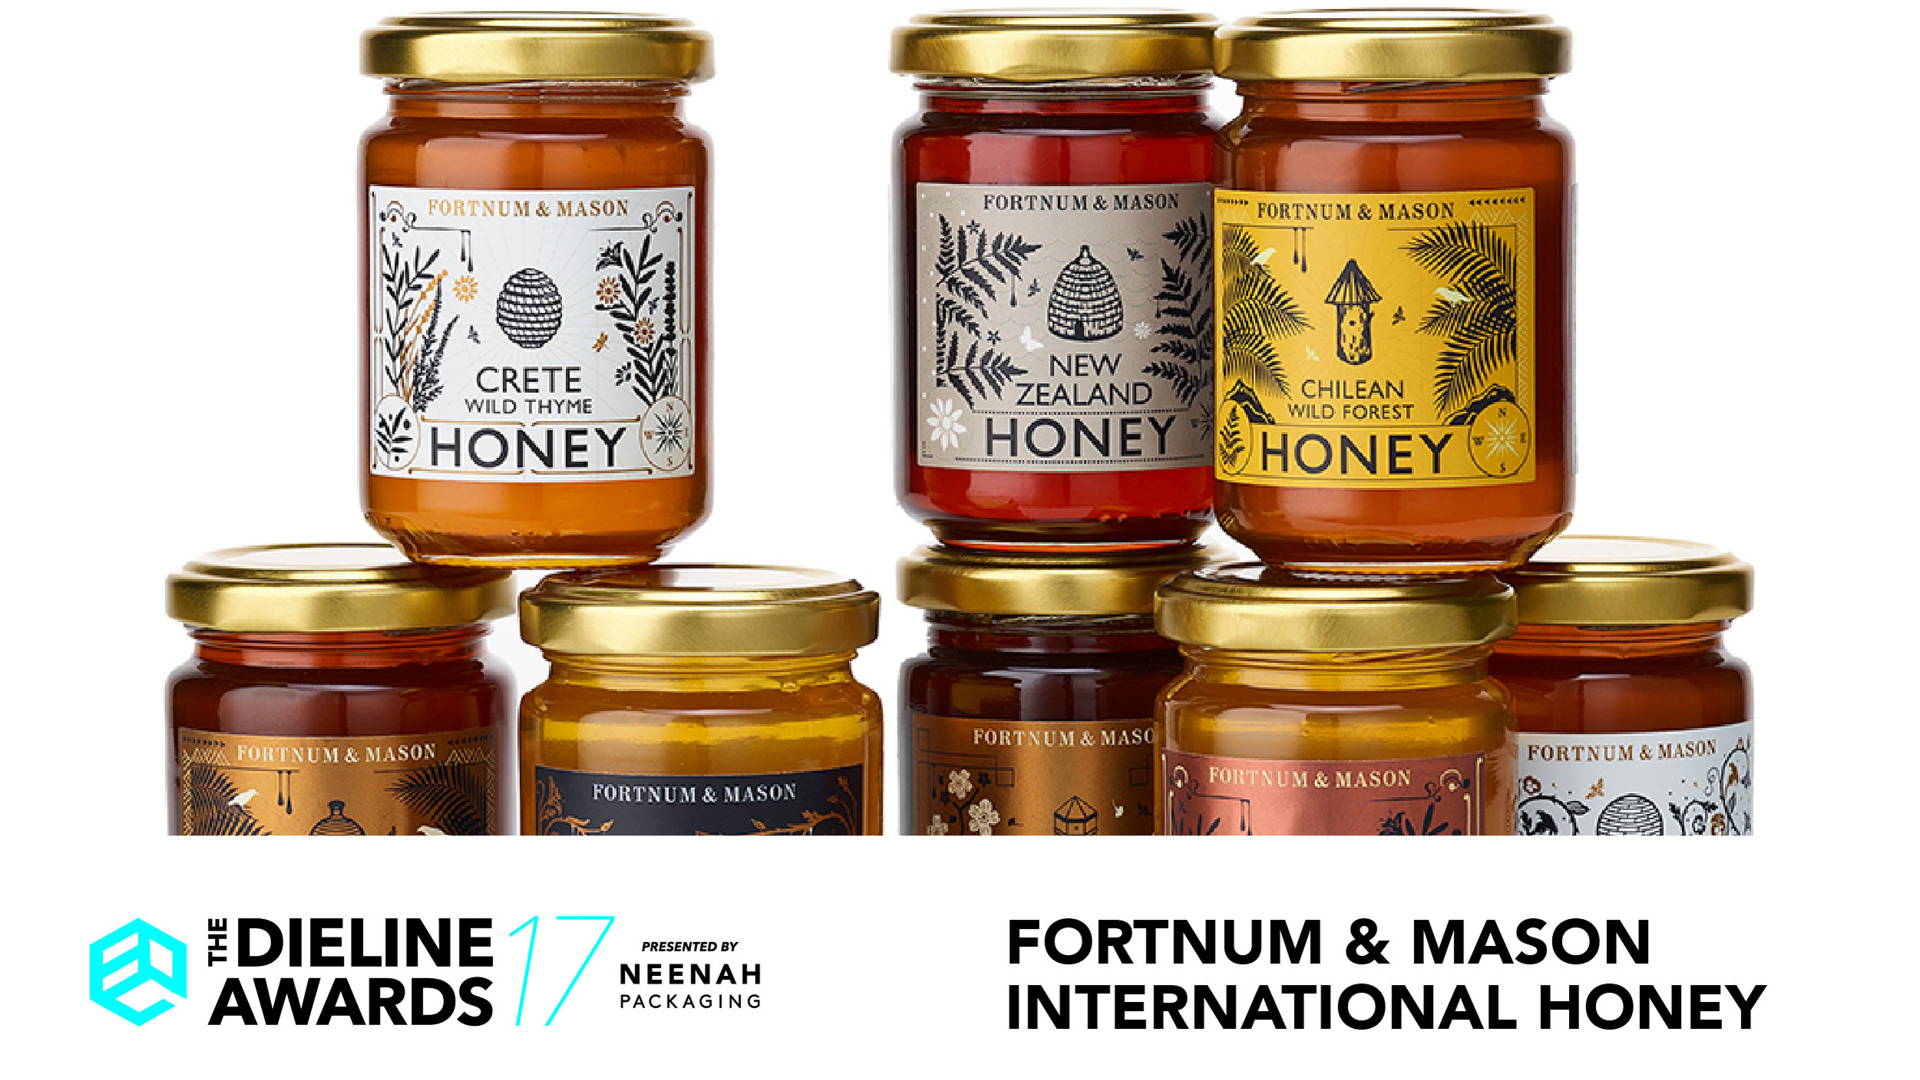 Featured image for The Dieline Awards 2017 Outstanding Achievements: Fortnum & Mason International Honey